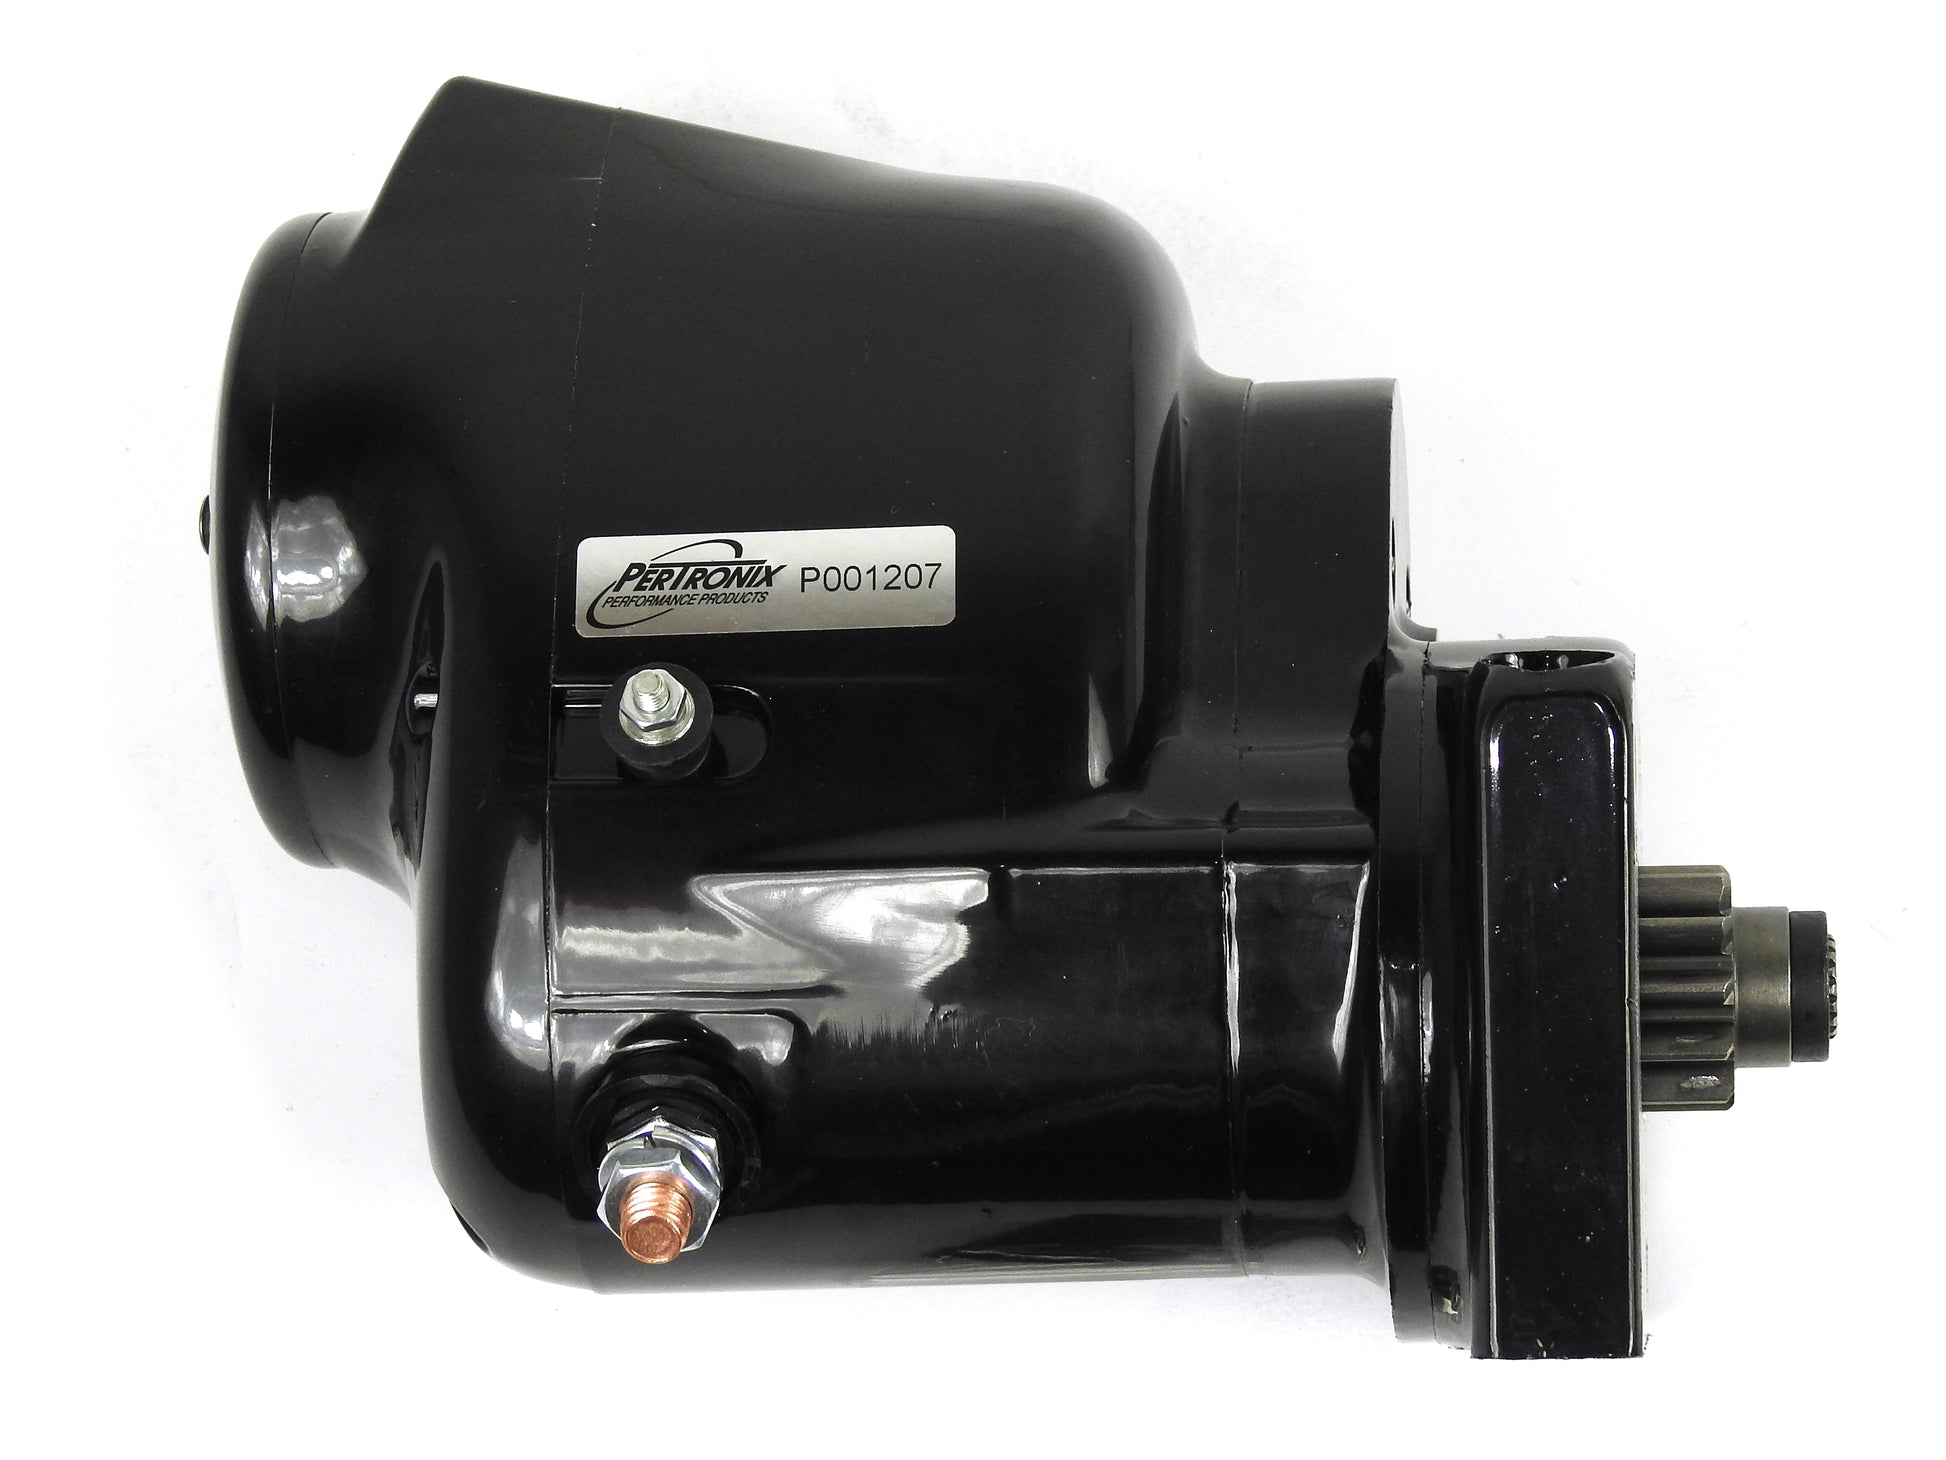 Pertronix part number S3000B-M Contour Marine Starter 1964-2000 Chevrolet SB/BB, 153T and 168T flywheels, 1963-74 L6 (230, 250, 292 engines) with straight botl pattern, black finish